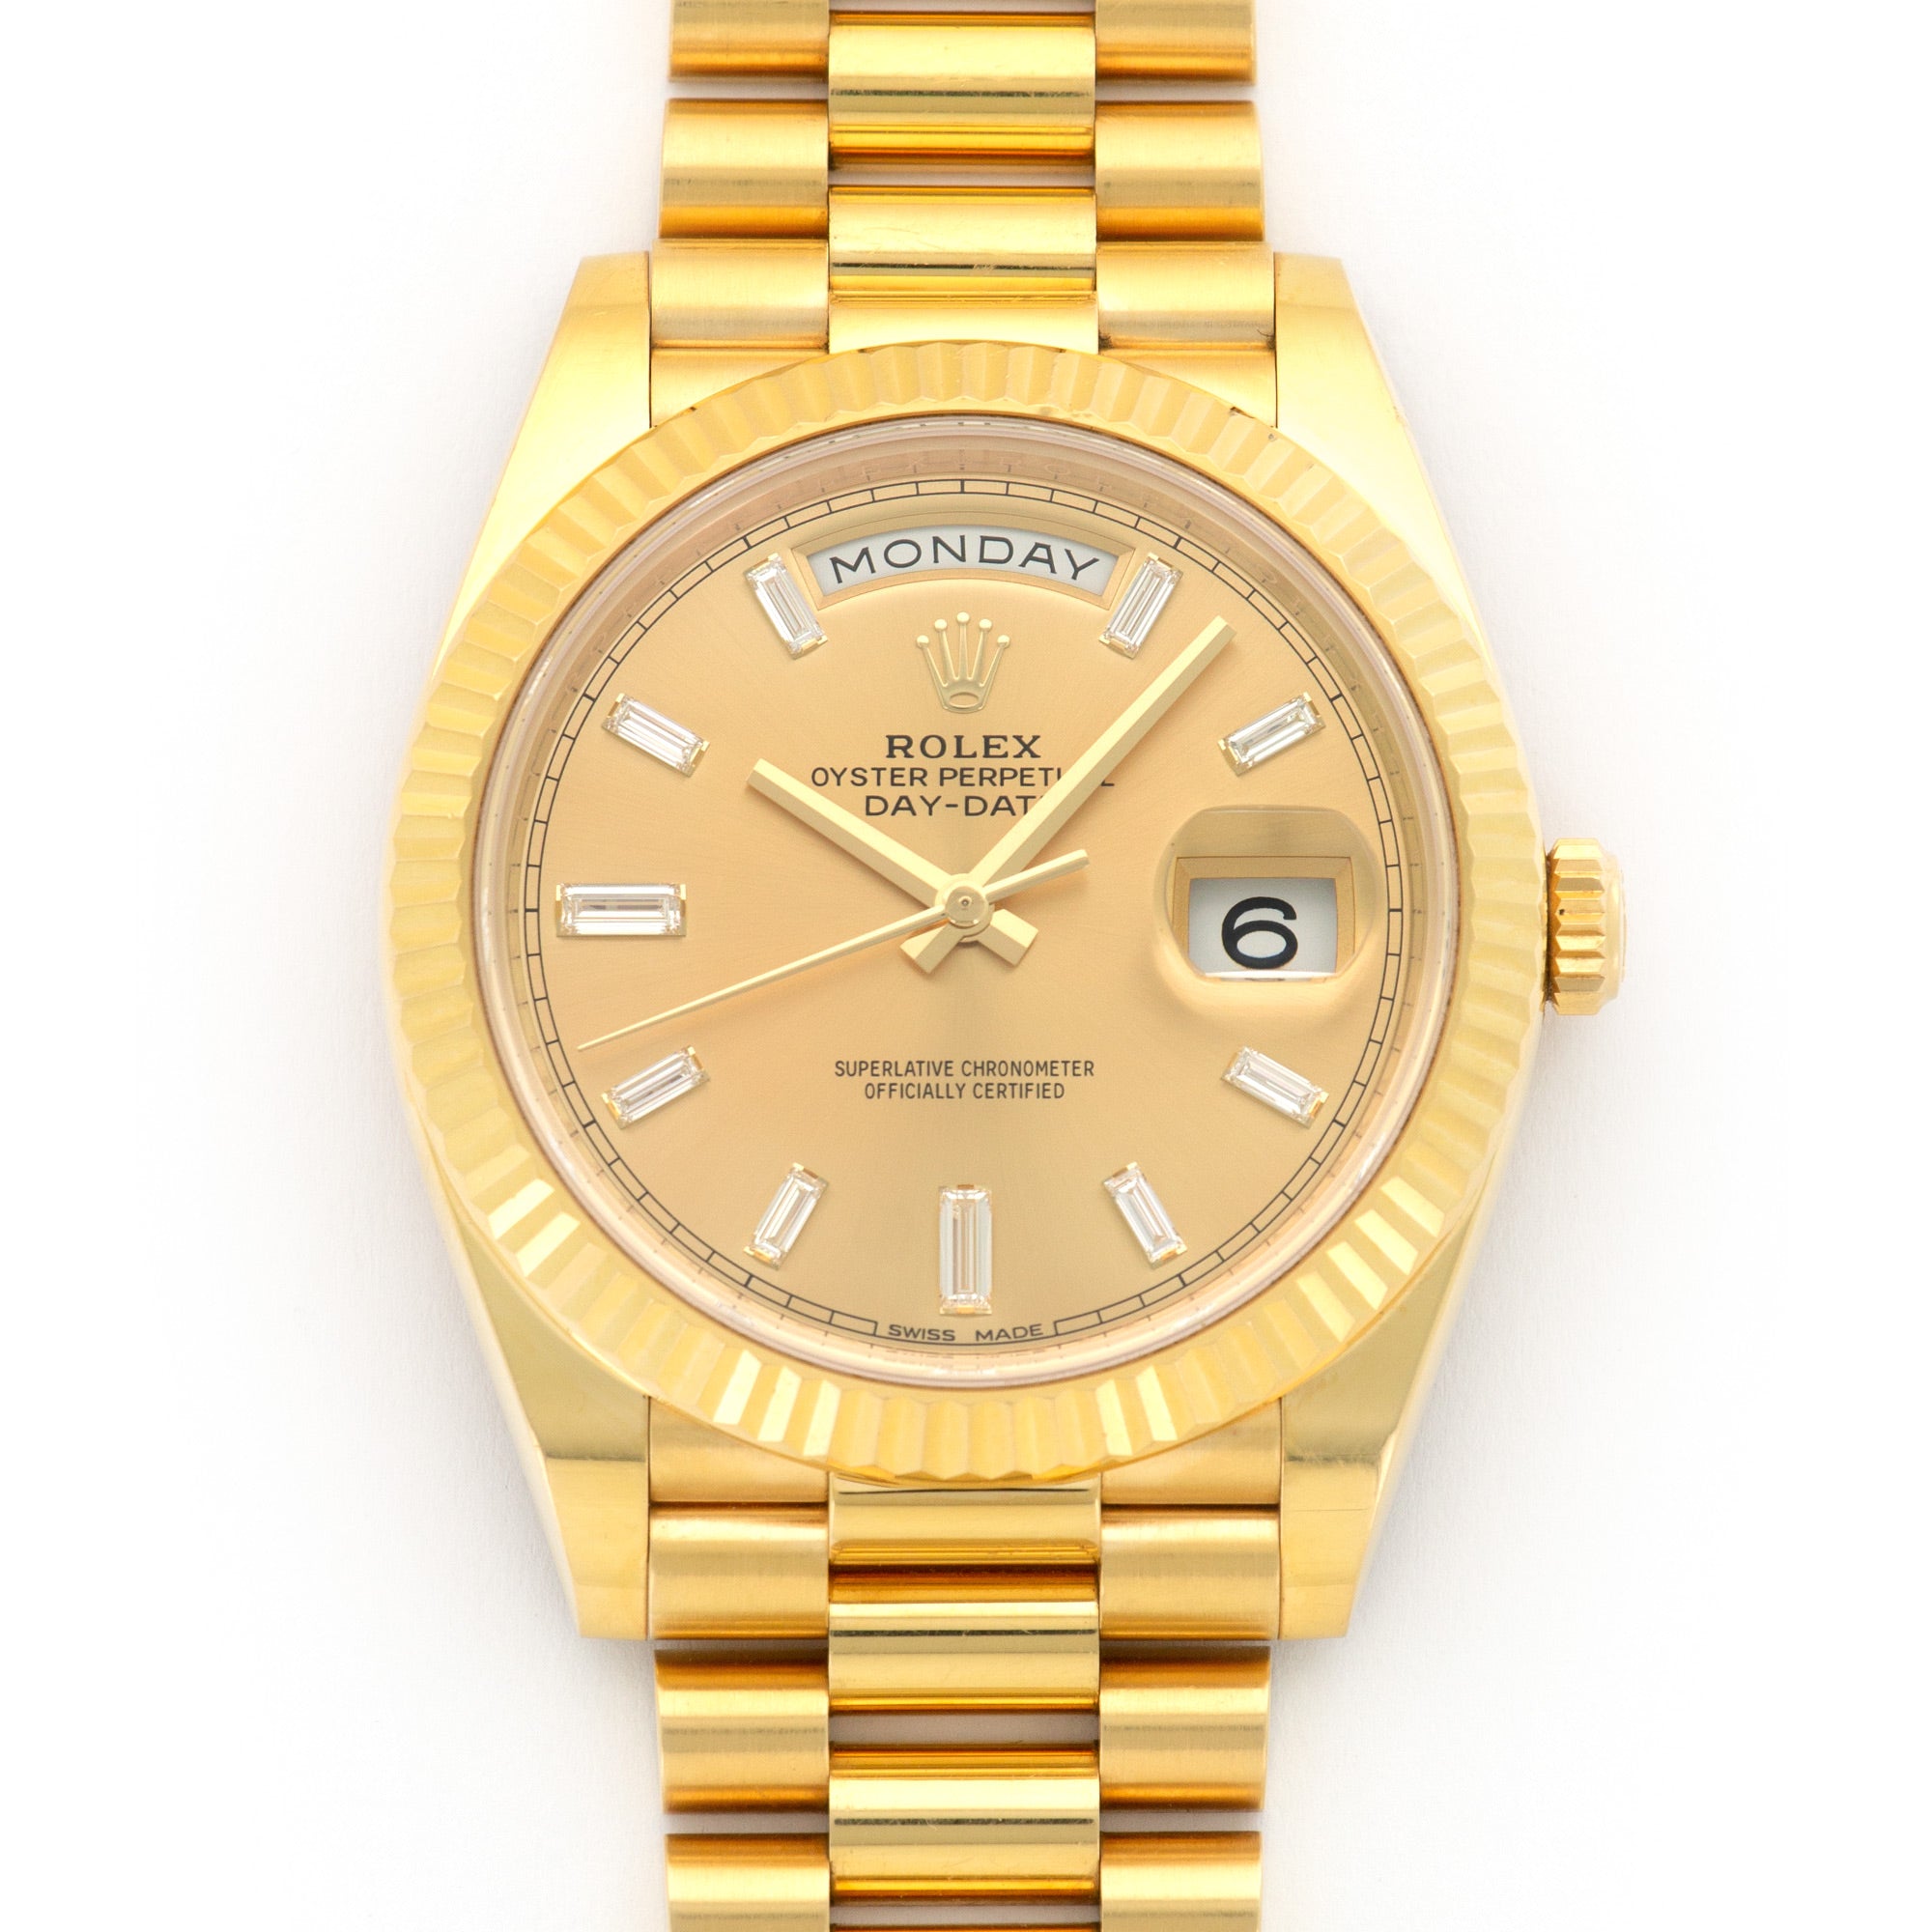 Rolex - Rolex Yellow Gold Day-Date 40mm Baguette Diamond Watch Ref. 228238 - The Keystone Watches